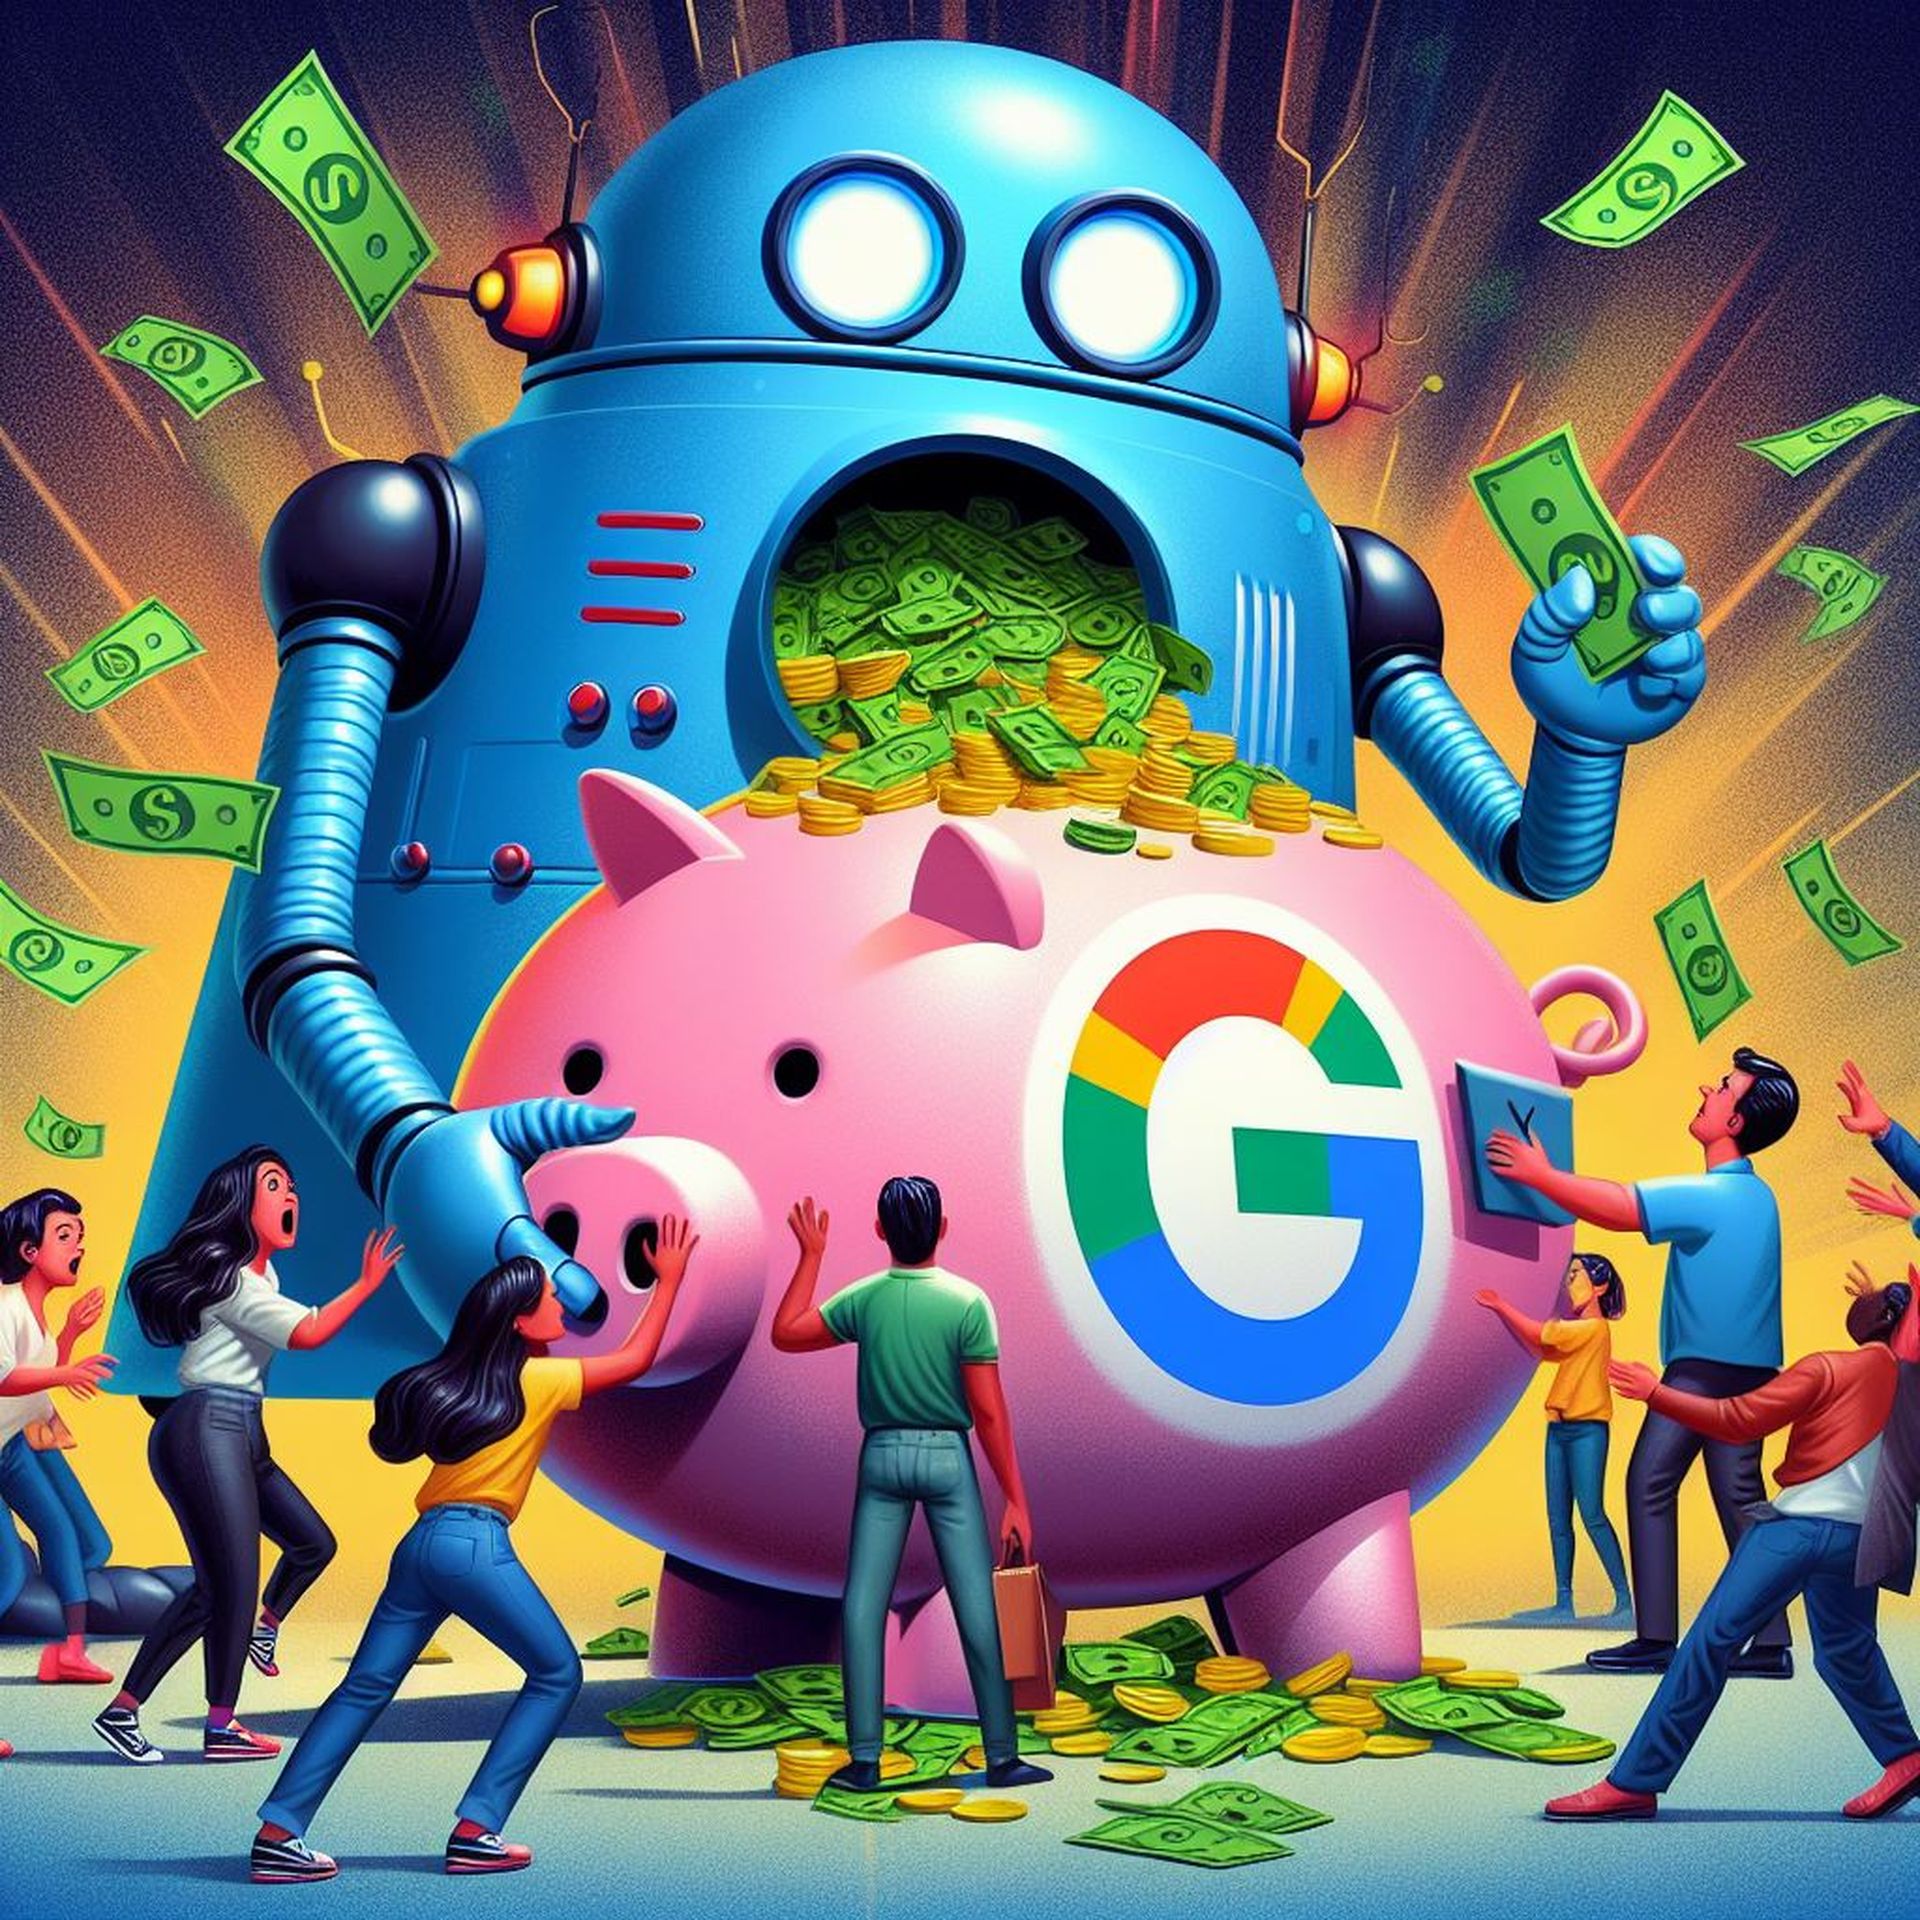 AI is draining Google’s money and we may be charged for it